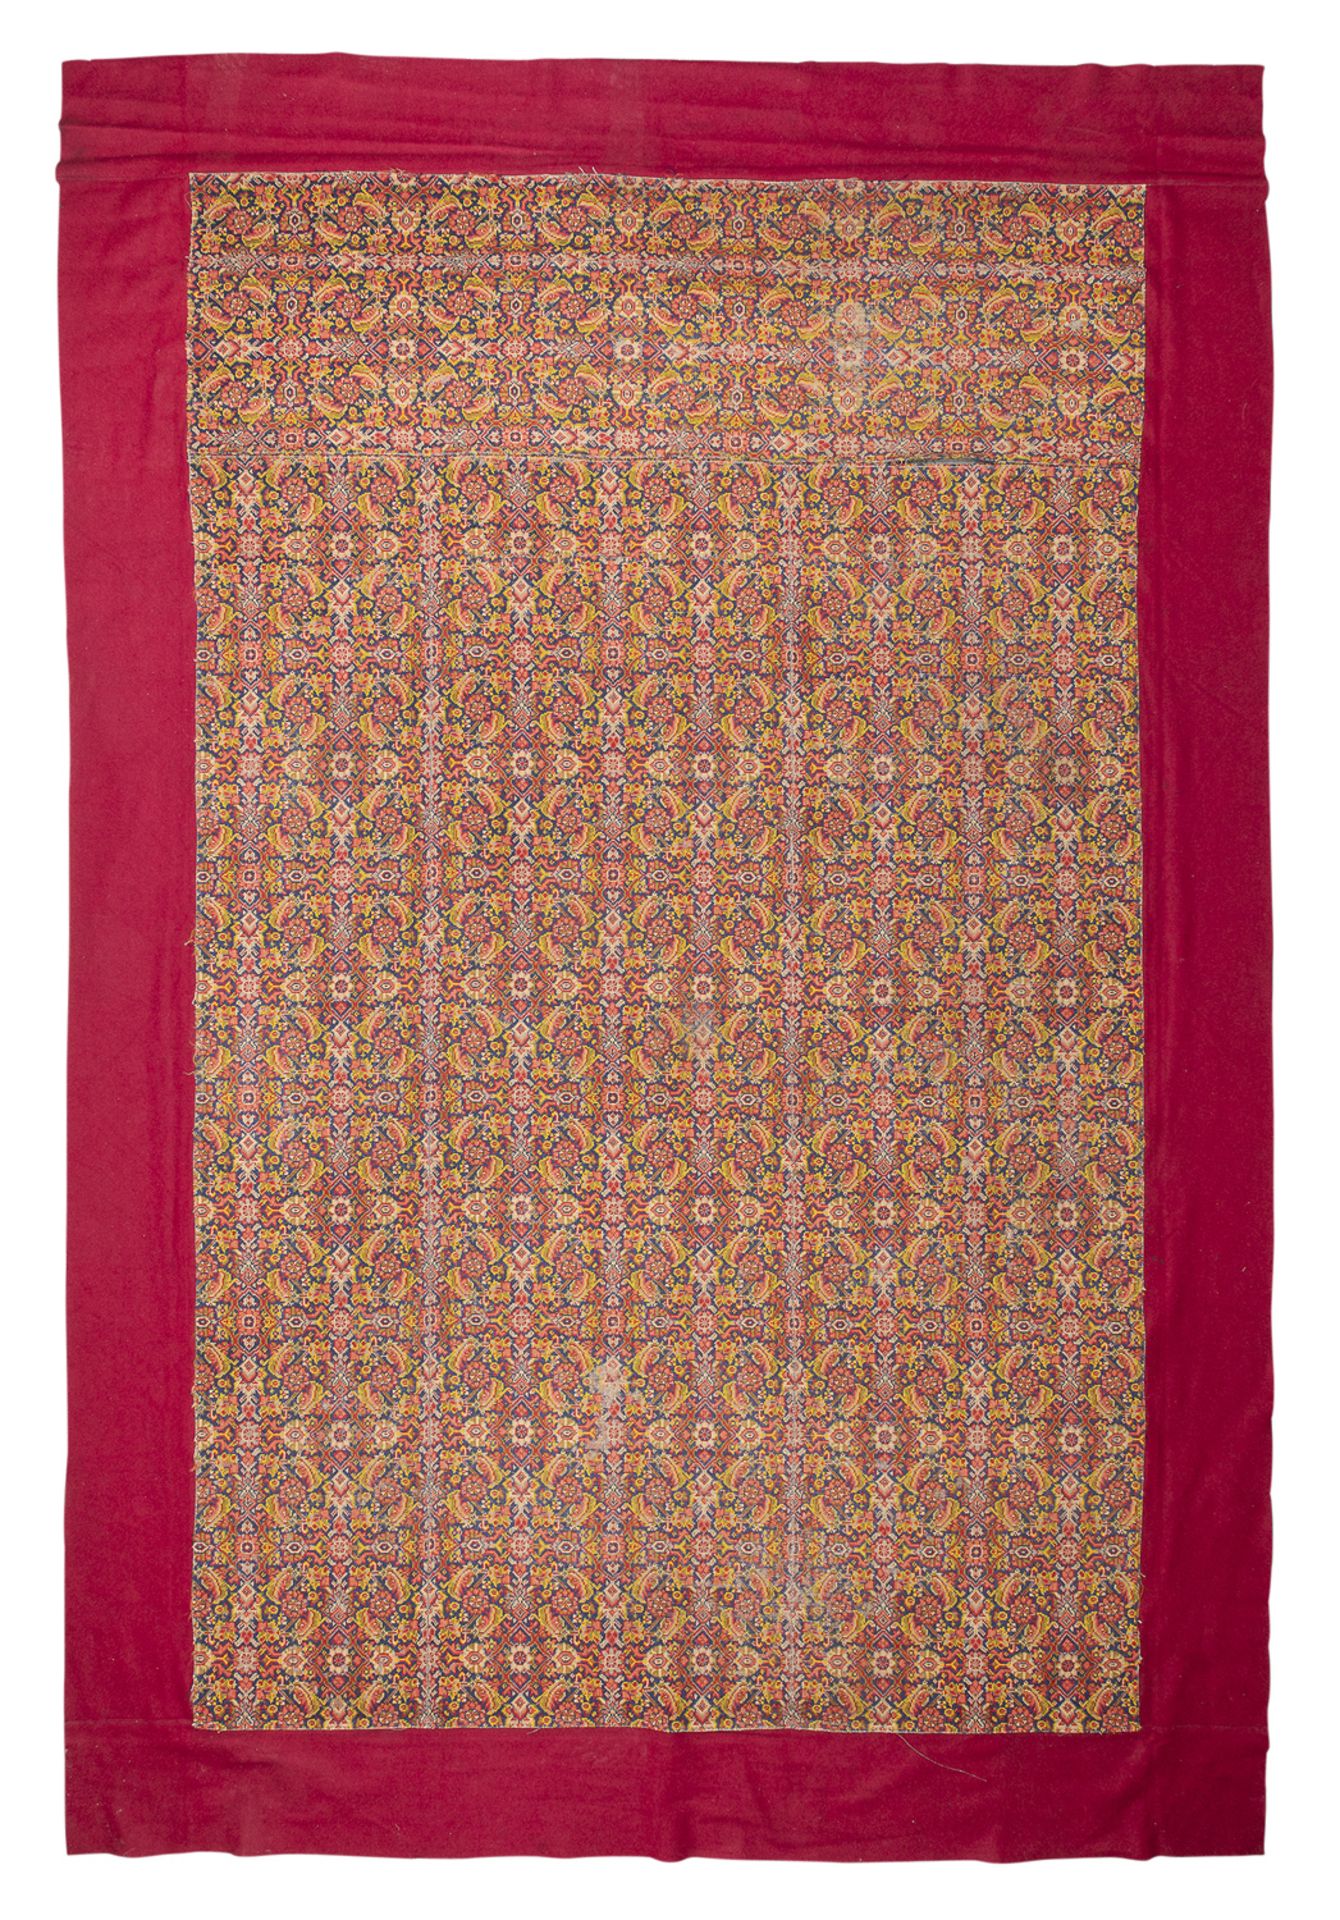 FRAGMENT OF A LARGE ANTIQUE MALAYER CARPET LATE 19th CENTURY